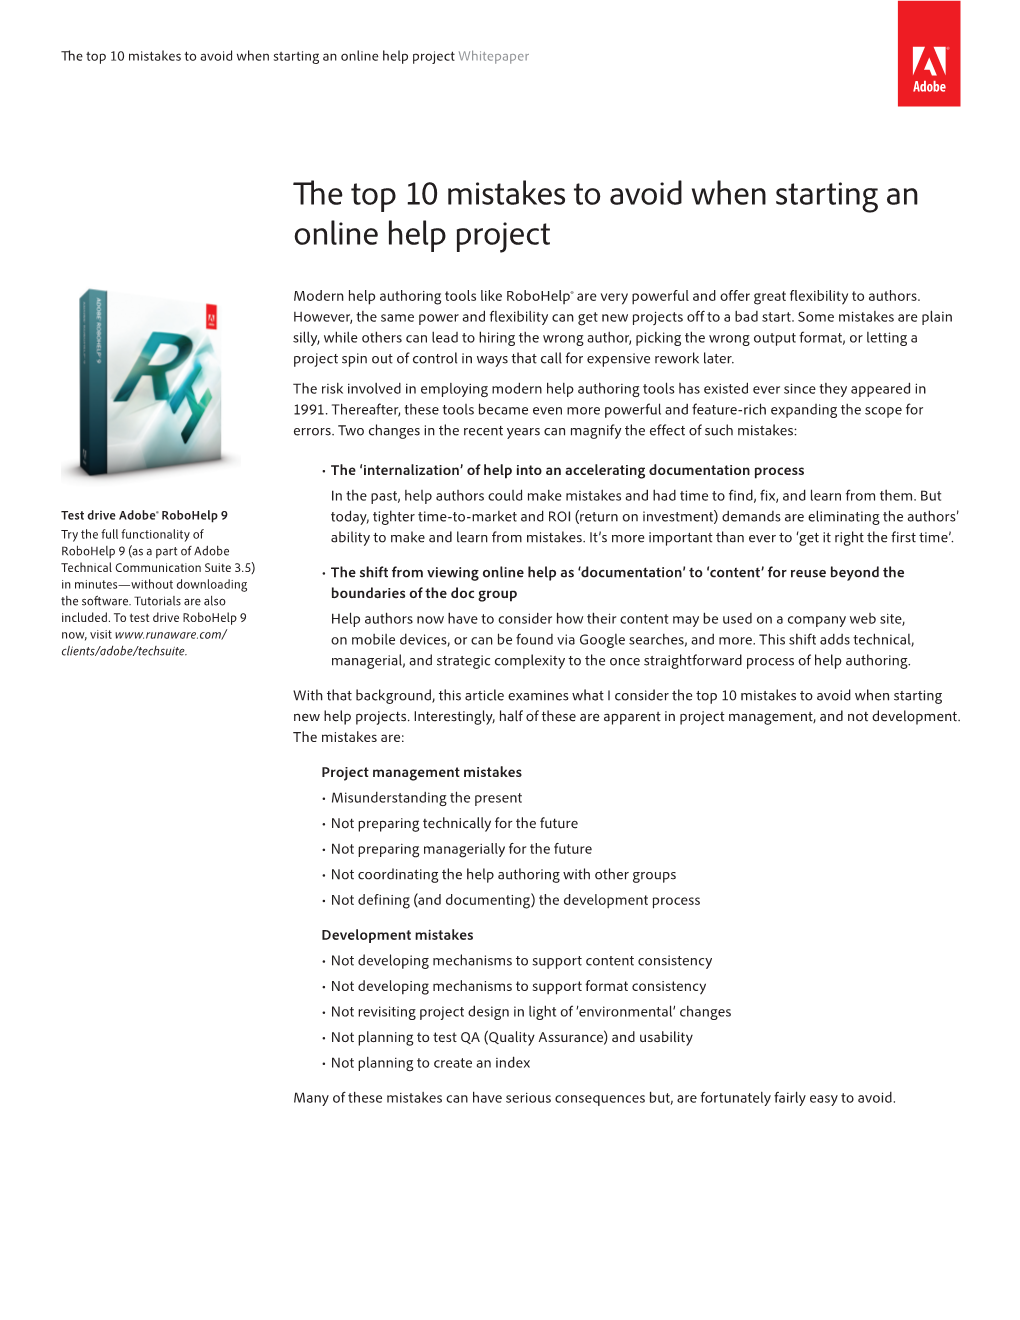 The Top 10 Mistakes to Avoid When Starting an Online Help Project